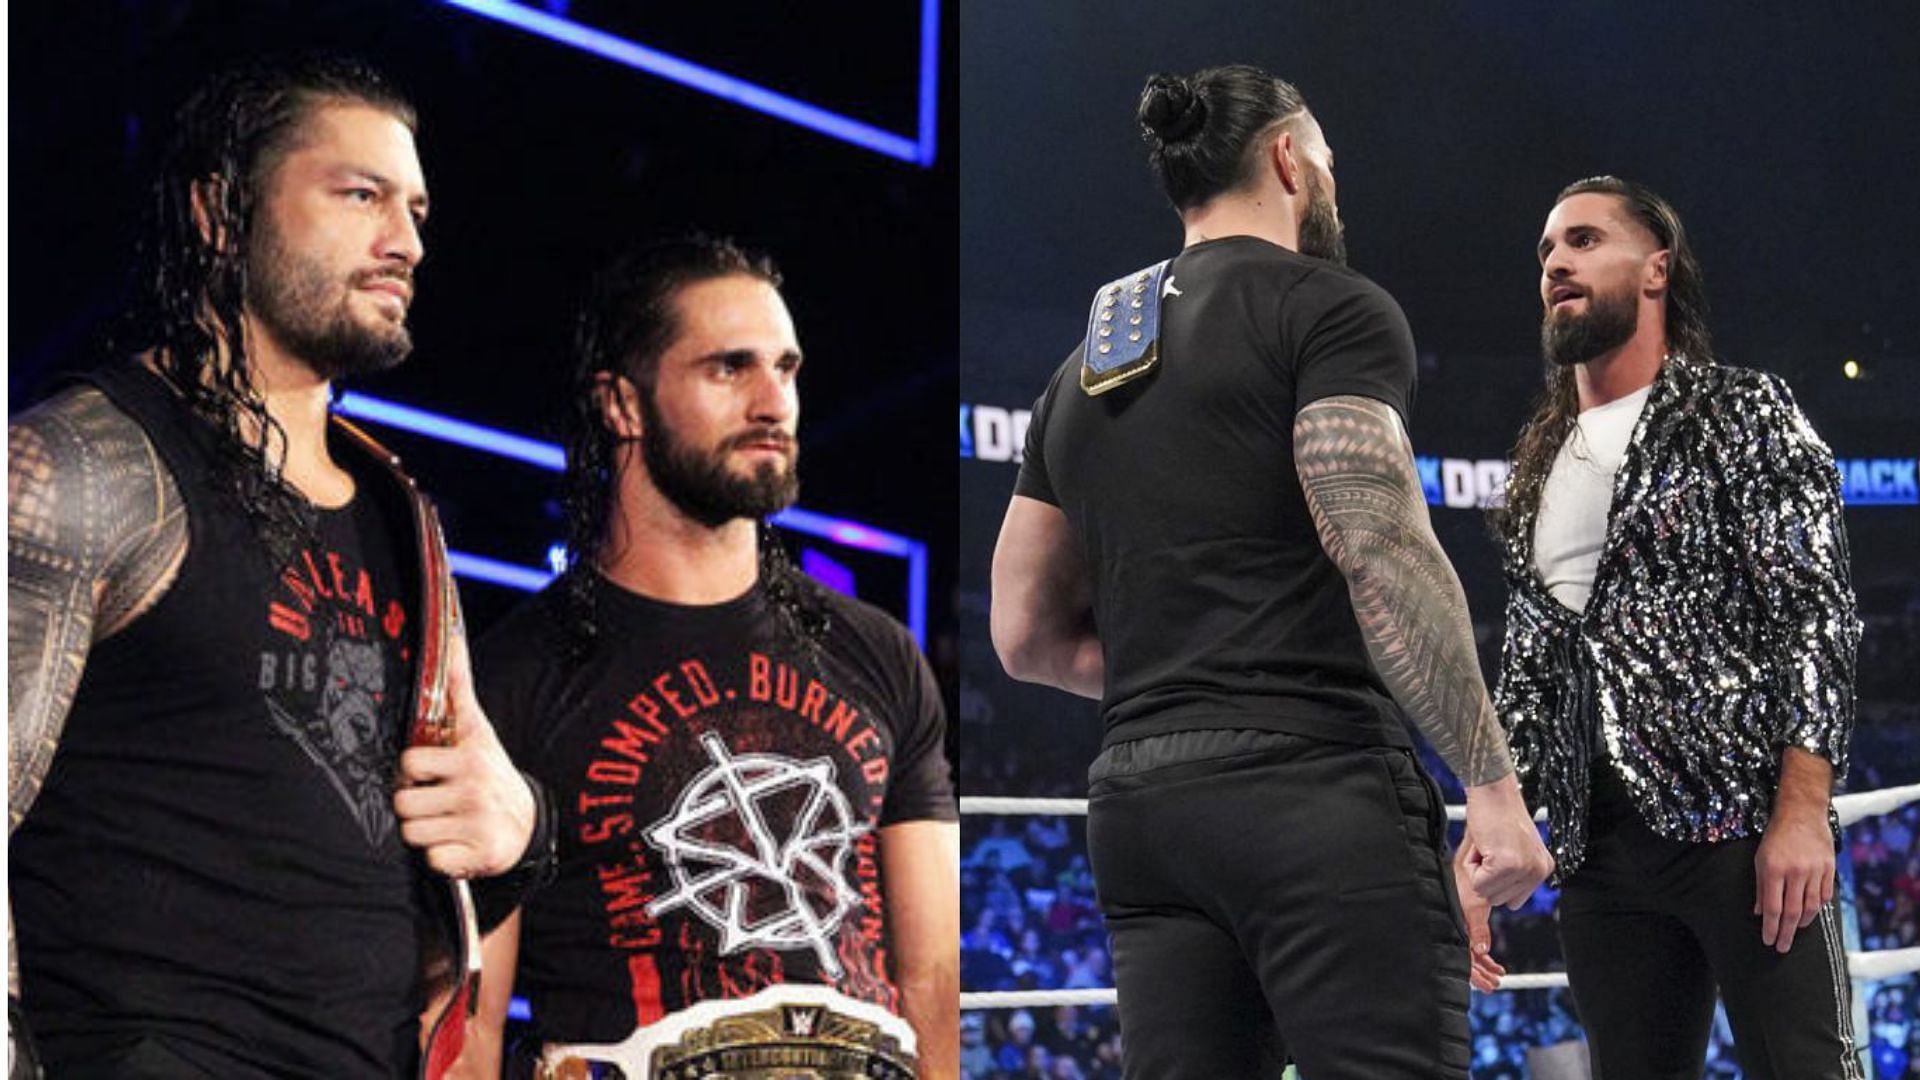 WWE Superstars, Roman Reigns and Seth Rollins